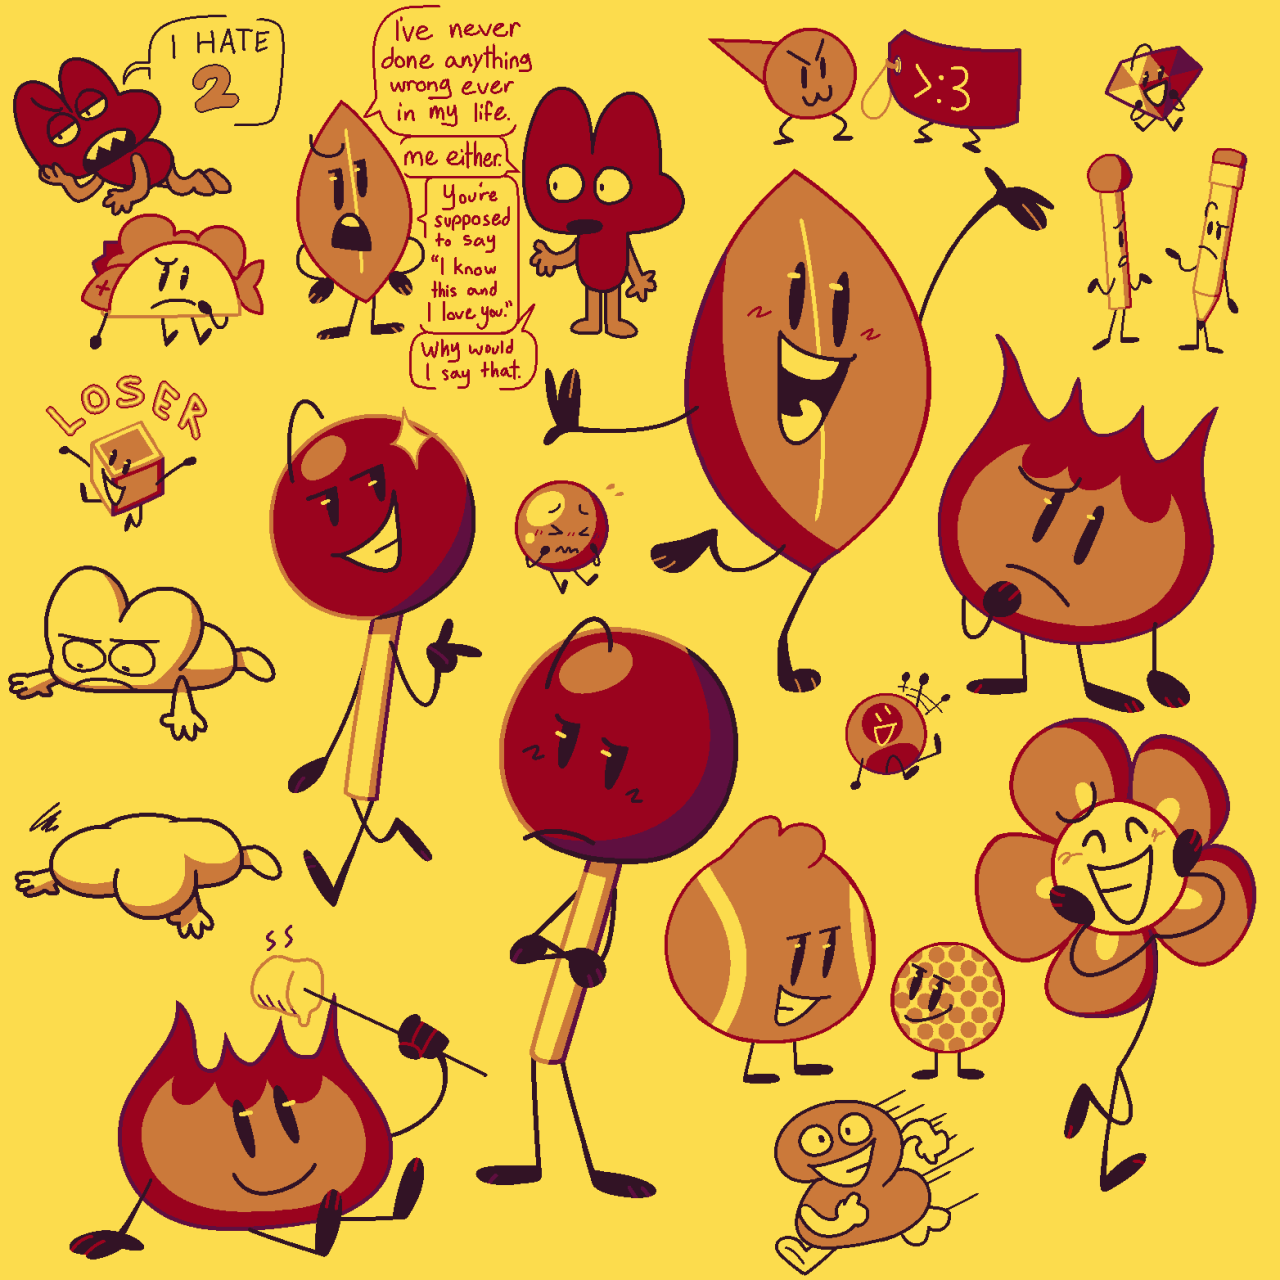 objects #bfdi#bfb#tpot#xfohv#bfb four#bfb x #i can just list all of them in one tag right i mean the search system is weird  #leafy firey tennis ball golf ball flower lollipop bubble profiley price tag taggy naily ruby pencil match loser taco two is that everyone  #tagging is too annoying  #anywayyyy i did a random color palette generator and this was the first result of colors. hurties my eyes a bit after staring at it 4ever #eyestrain#my art #wow i posted this at the same time on twitter but didnt notice that twitter had an error and didnt post it rude!!!!!!!!!!!!!!!!!